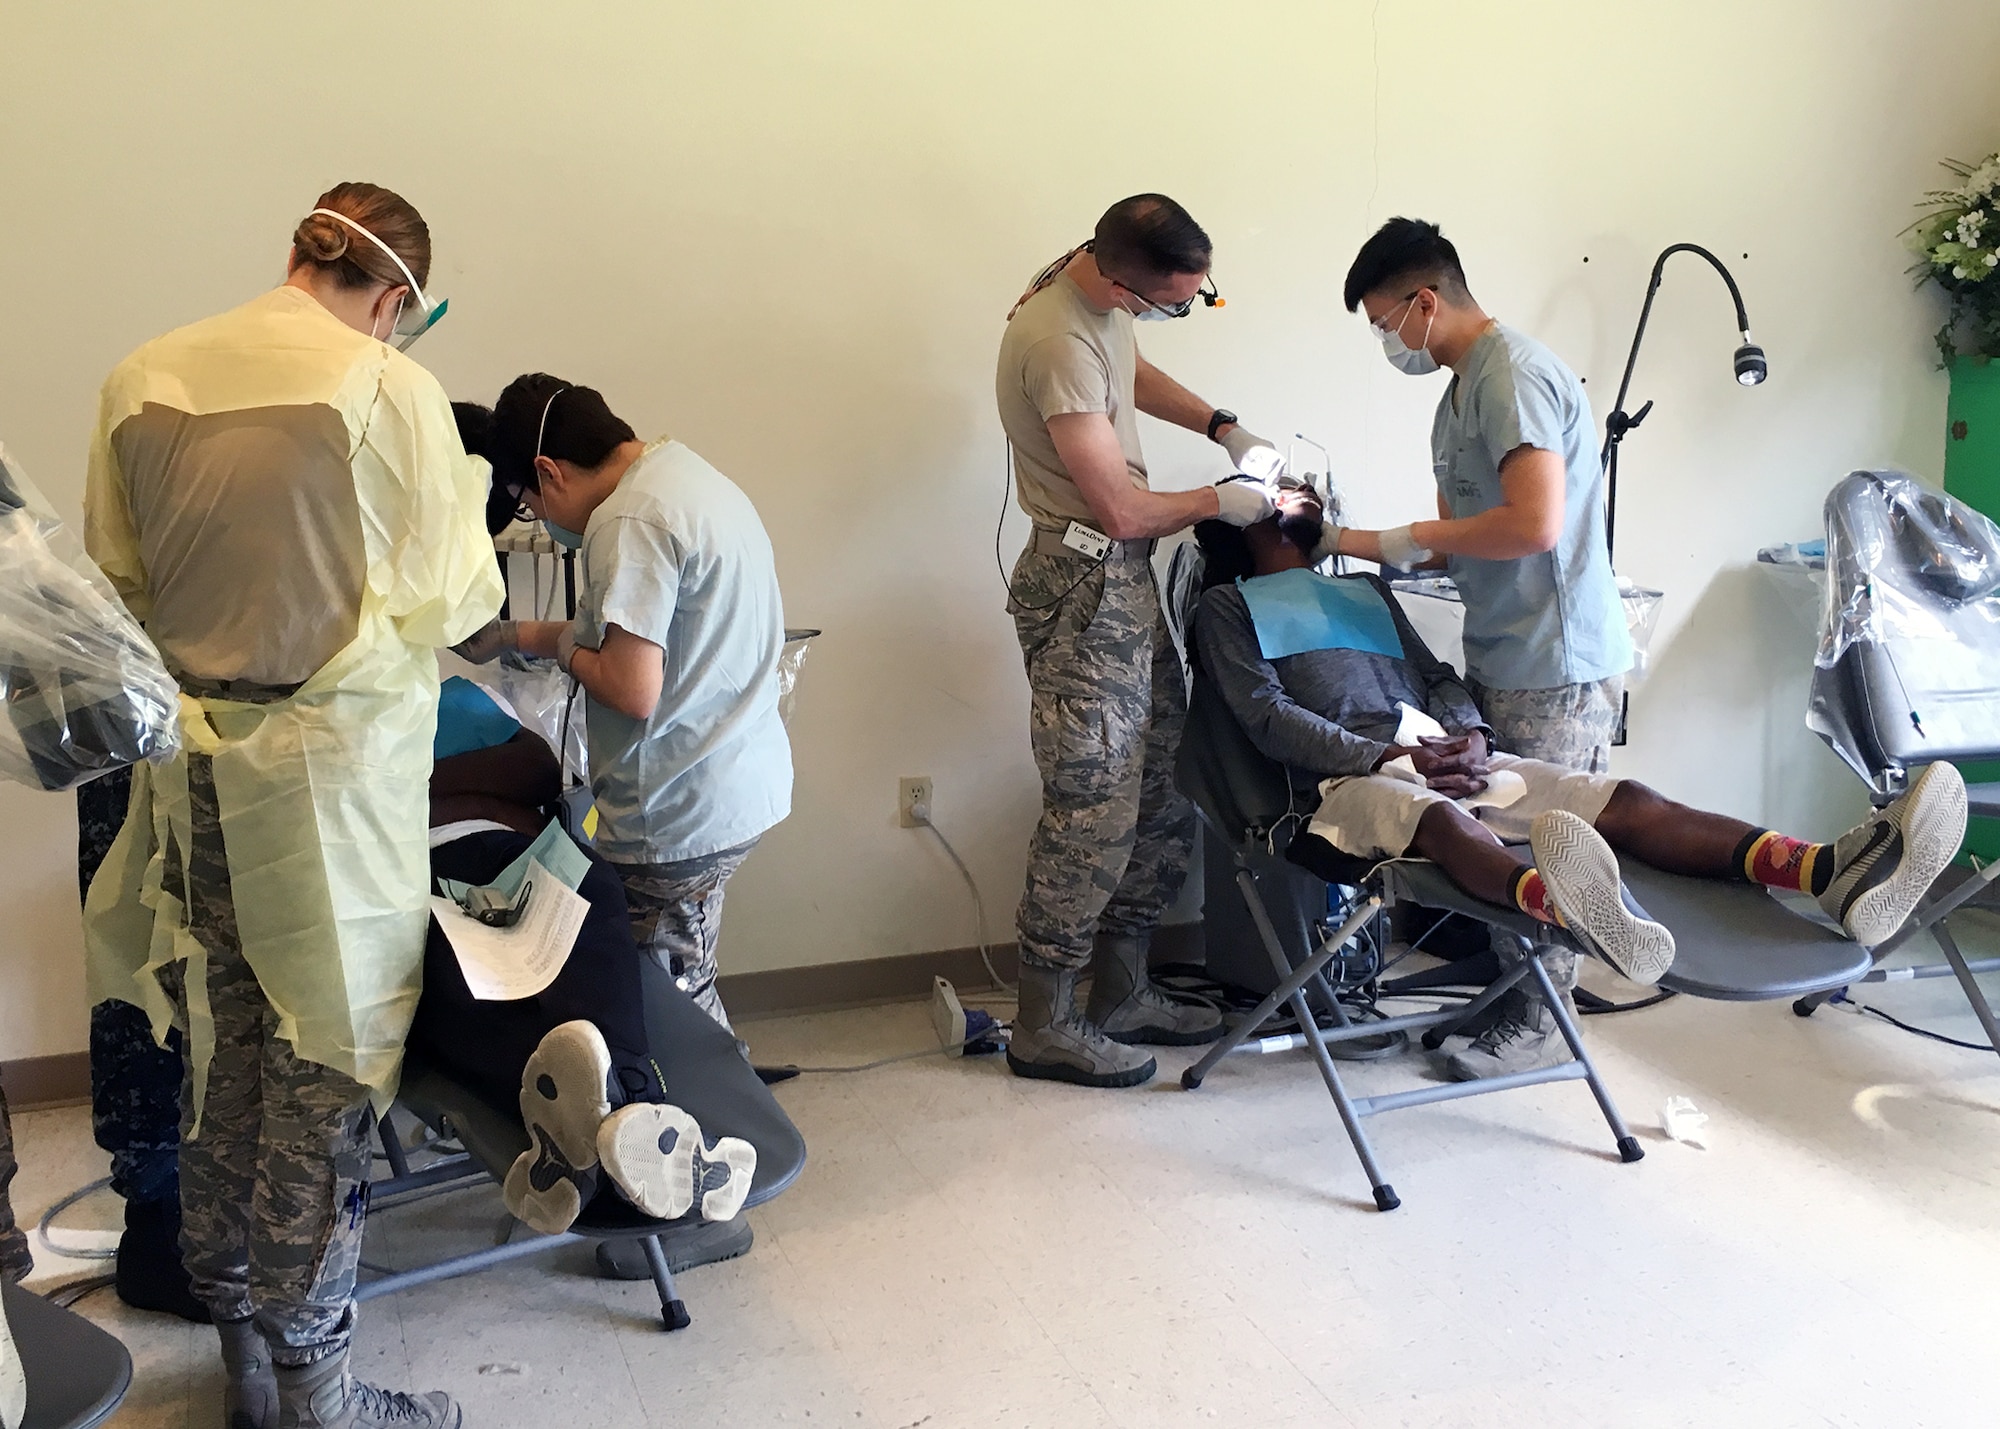 Air National Guard, Navy (Active and Reserve), and Active Component Air Force dentists trained and provided dental care at a field-condition medical facility set up at the Eastwood Memorial United Methodist Church in Caruthersville, Missouri, from Sept. 13-21, during Operation Healthy Delta Innovative Readiness Training.